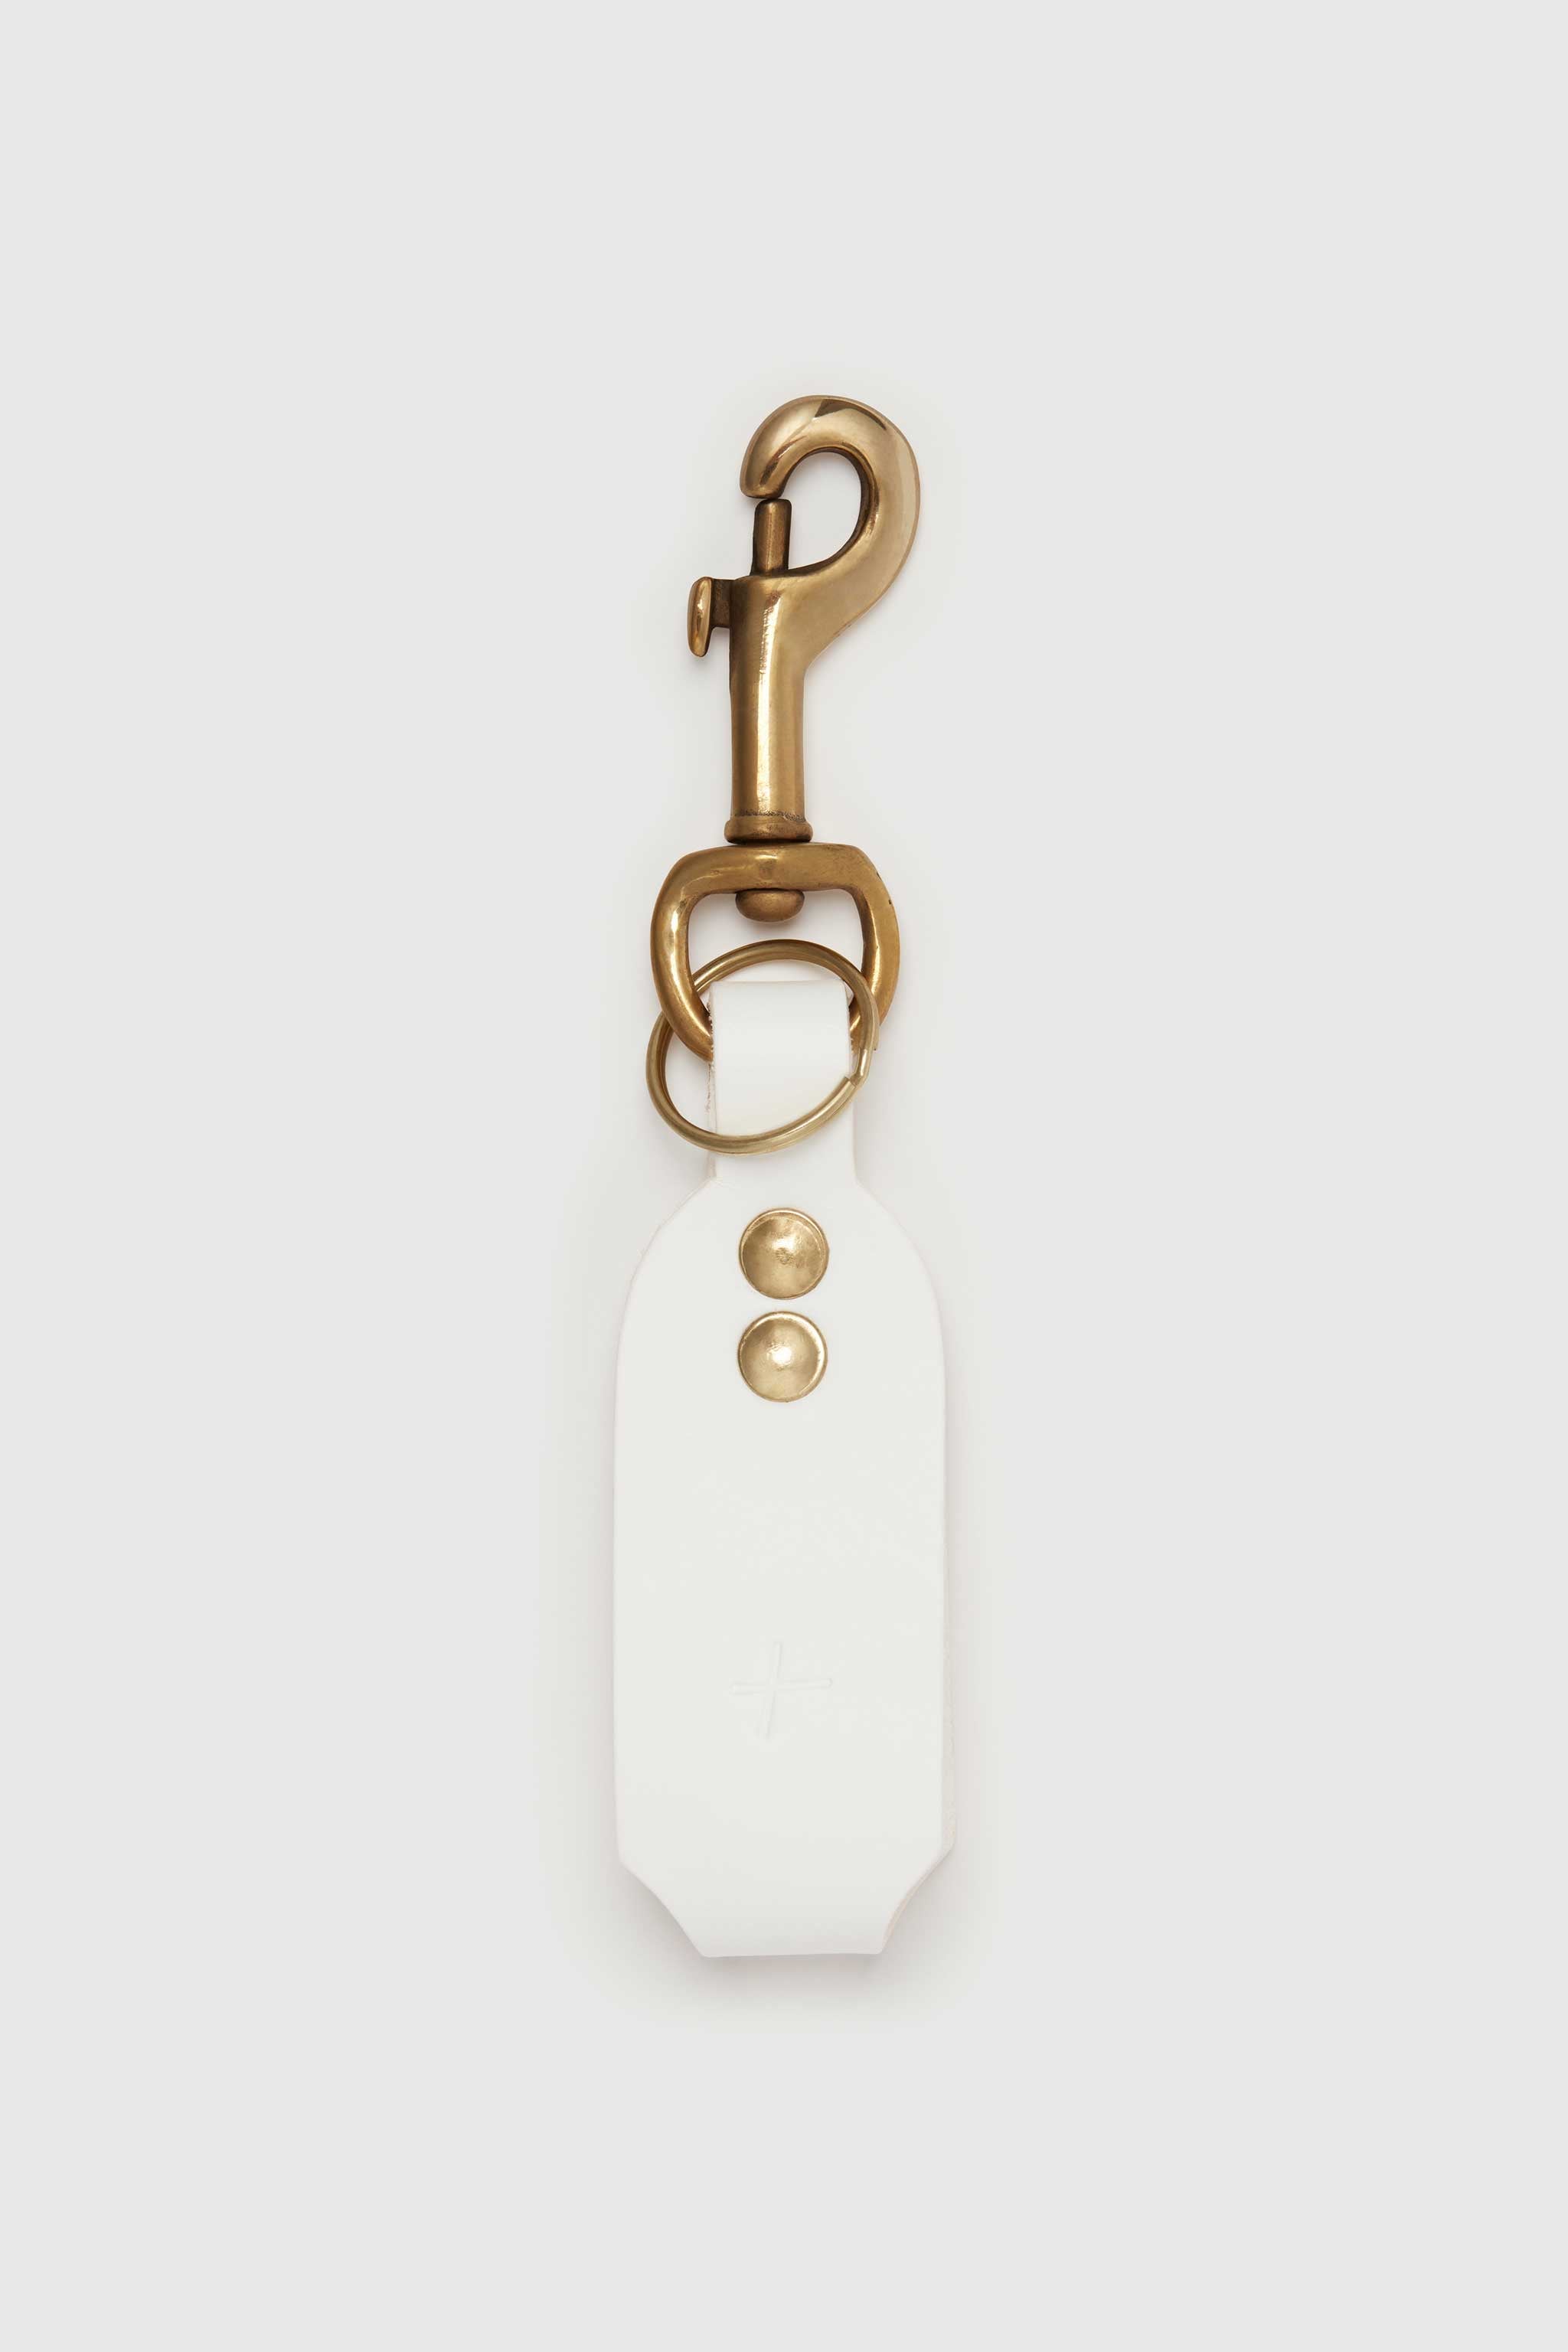 THE WARDEN KEYRING / LEATHER CHALK